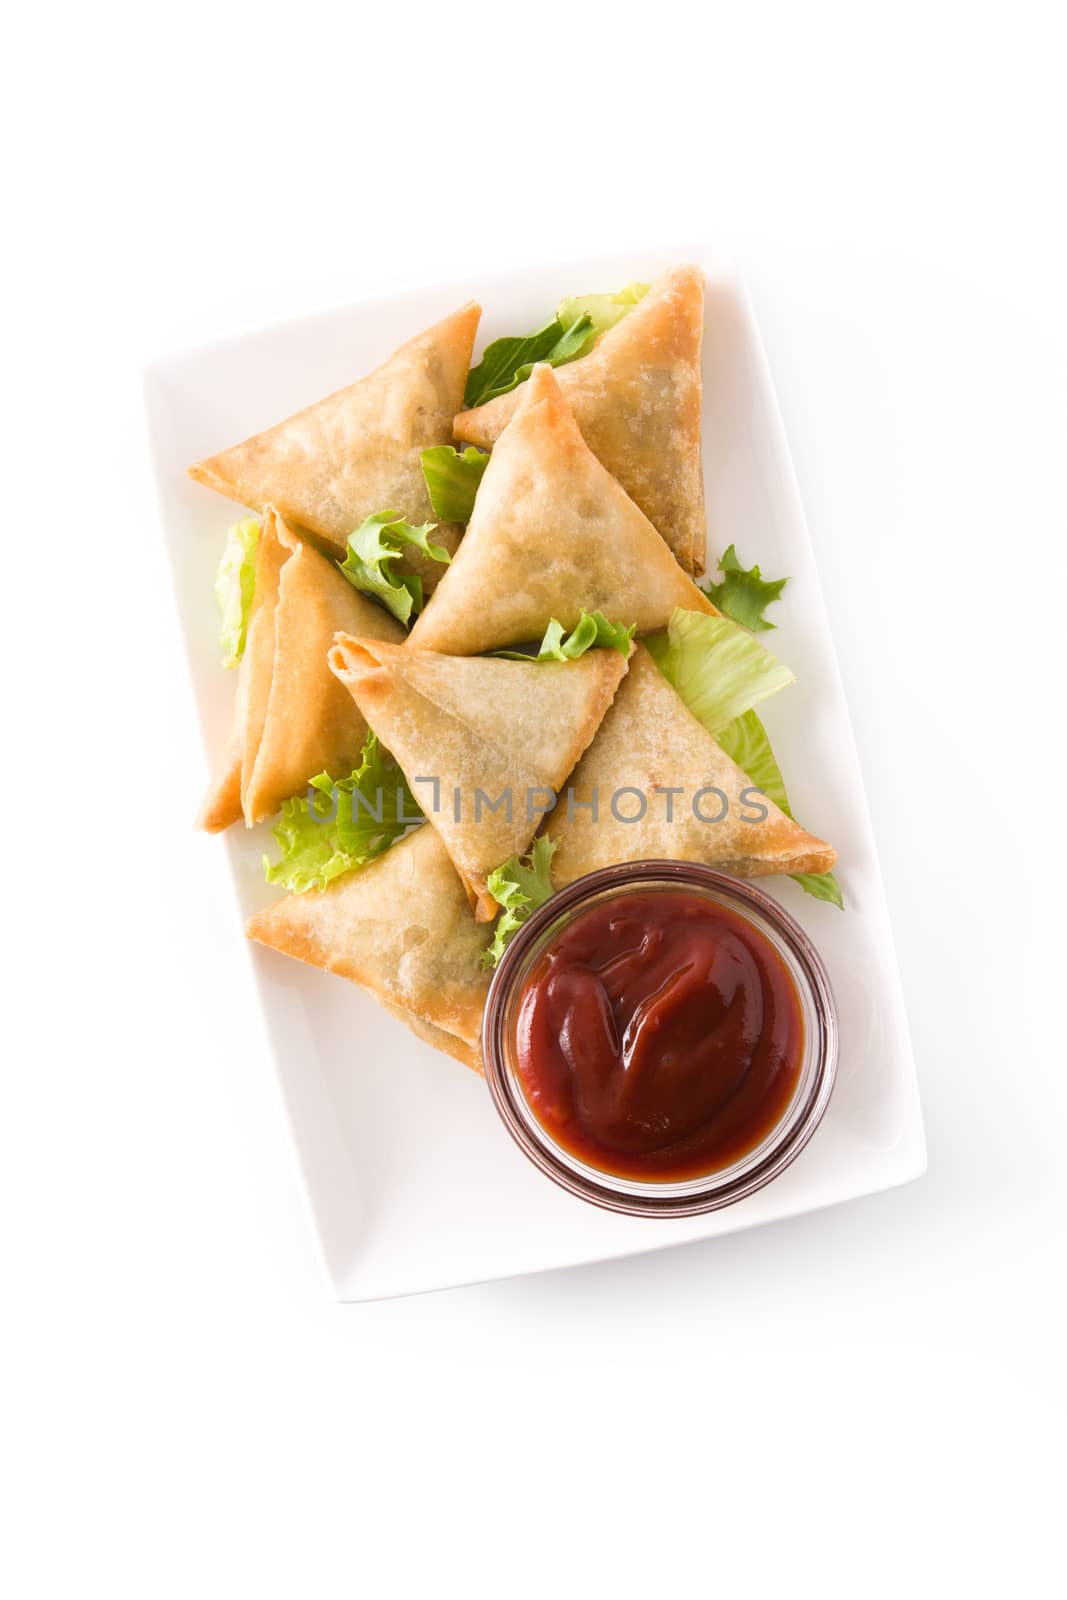 Samsa or samosas with meat and vegetables isolated on white background. Traditional Indian food. by chandlervid85